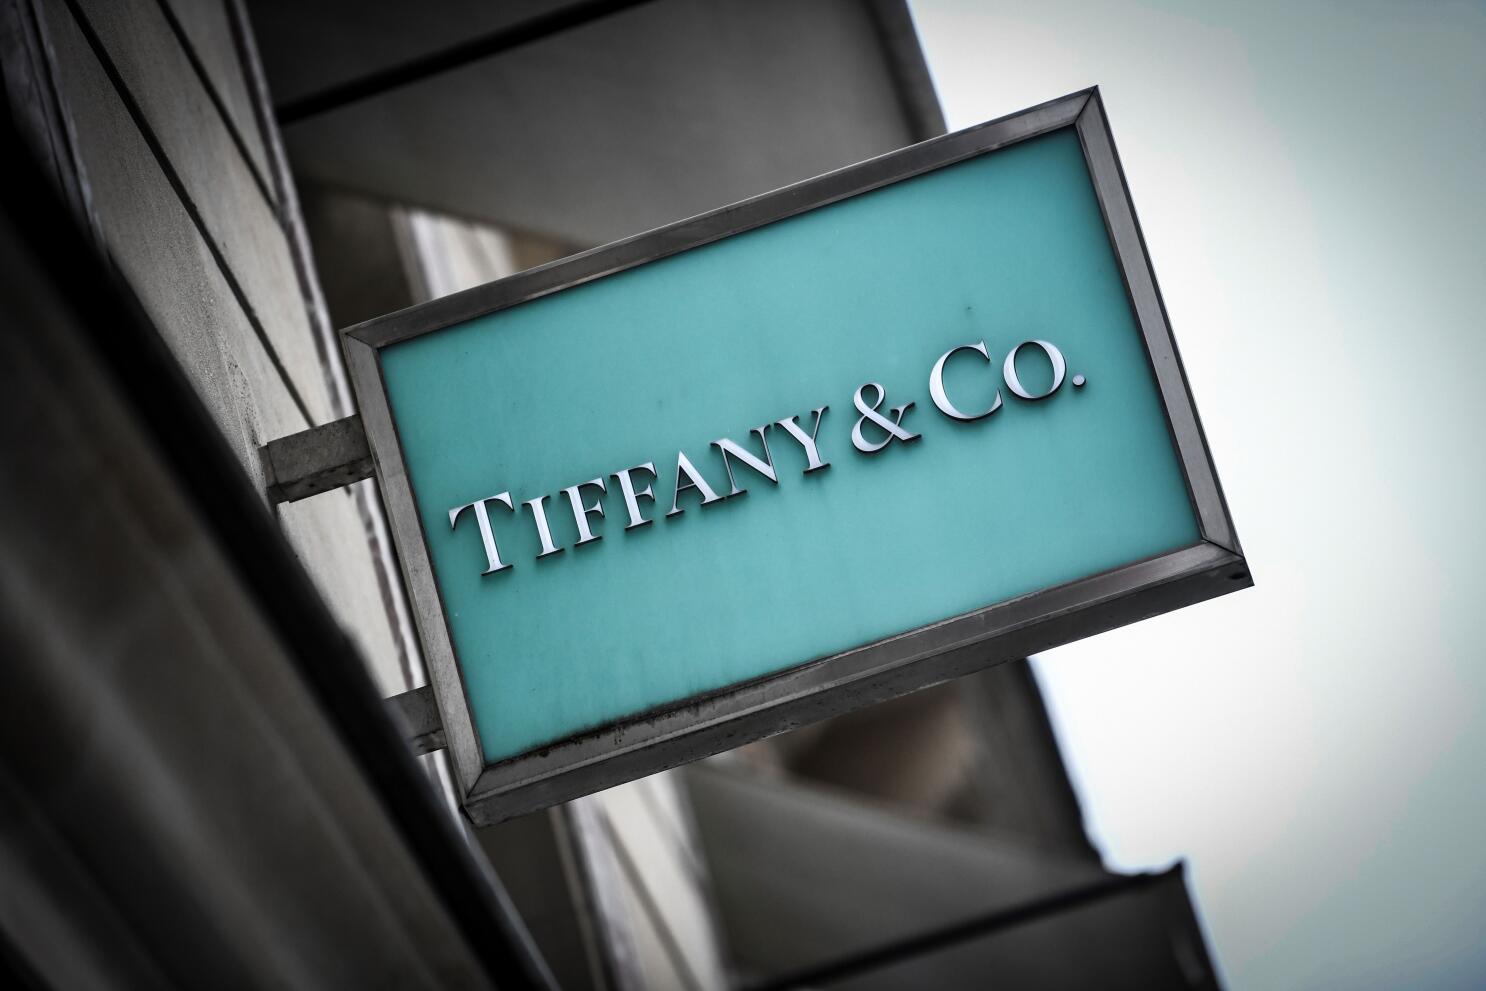 French luxury giant LVMH to buy Tiffany for $16.2 billion